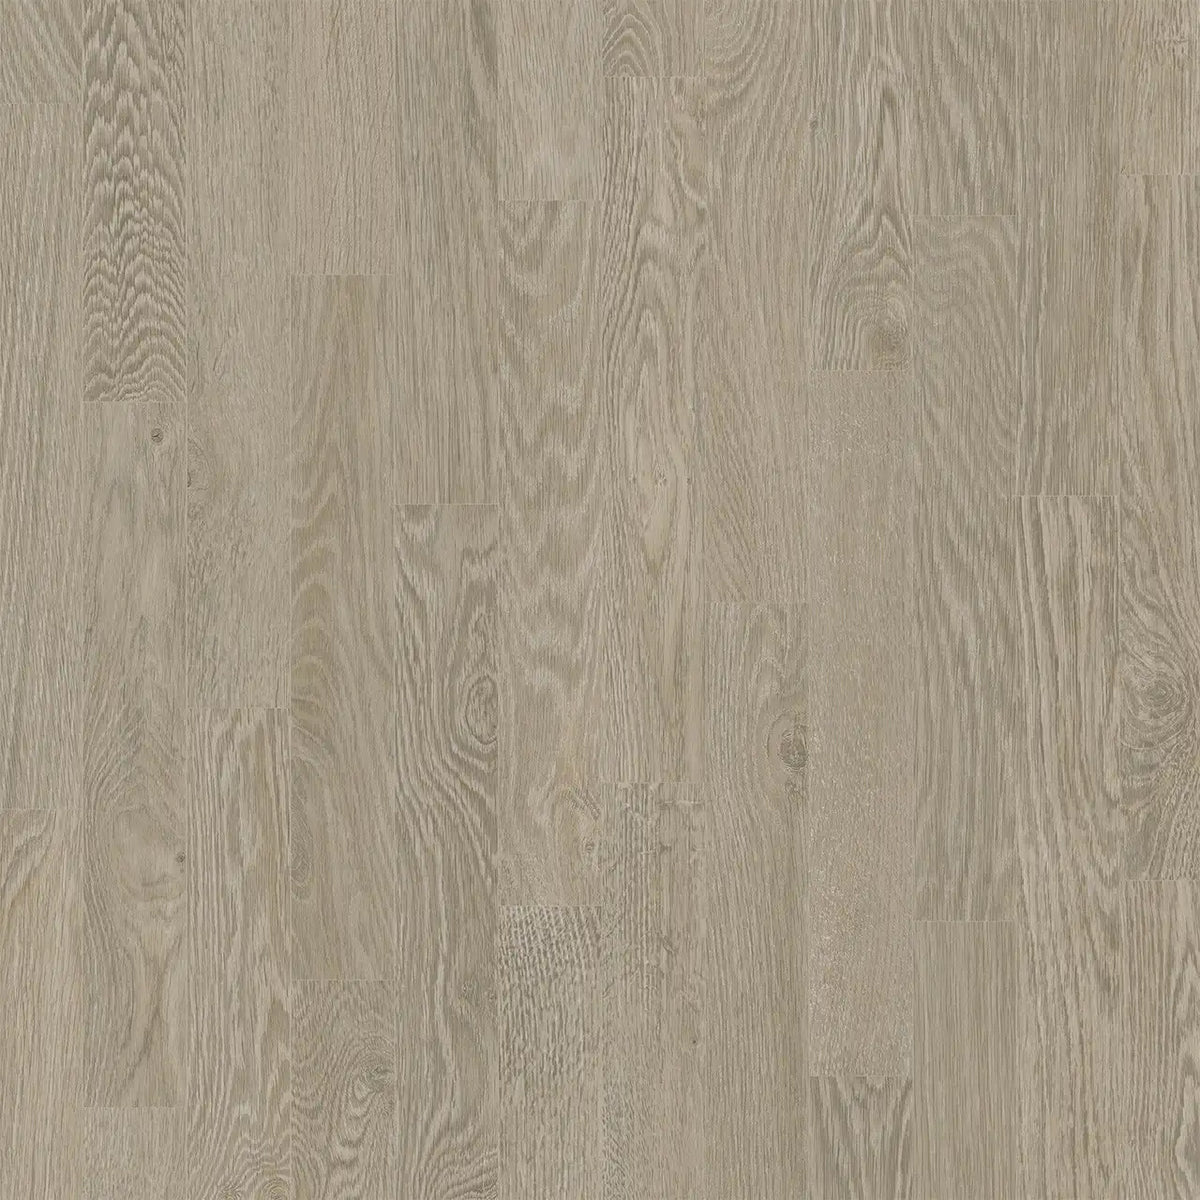 Engineered Floors - Atmosphere Collection - 7 in. x 48 in. - Aurora